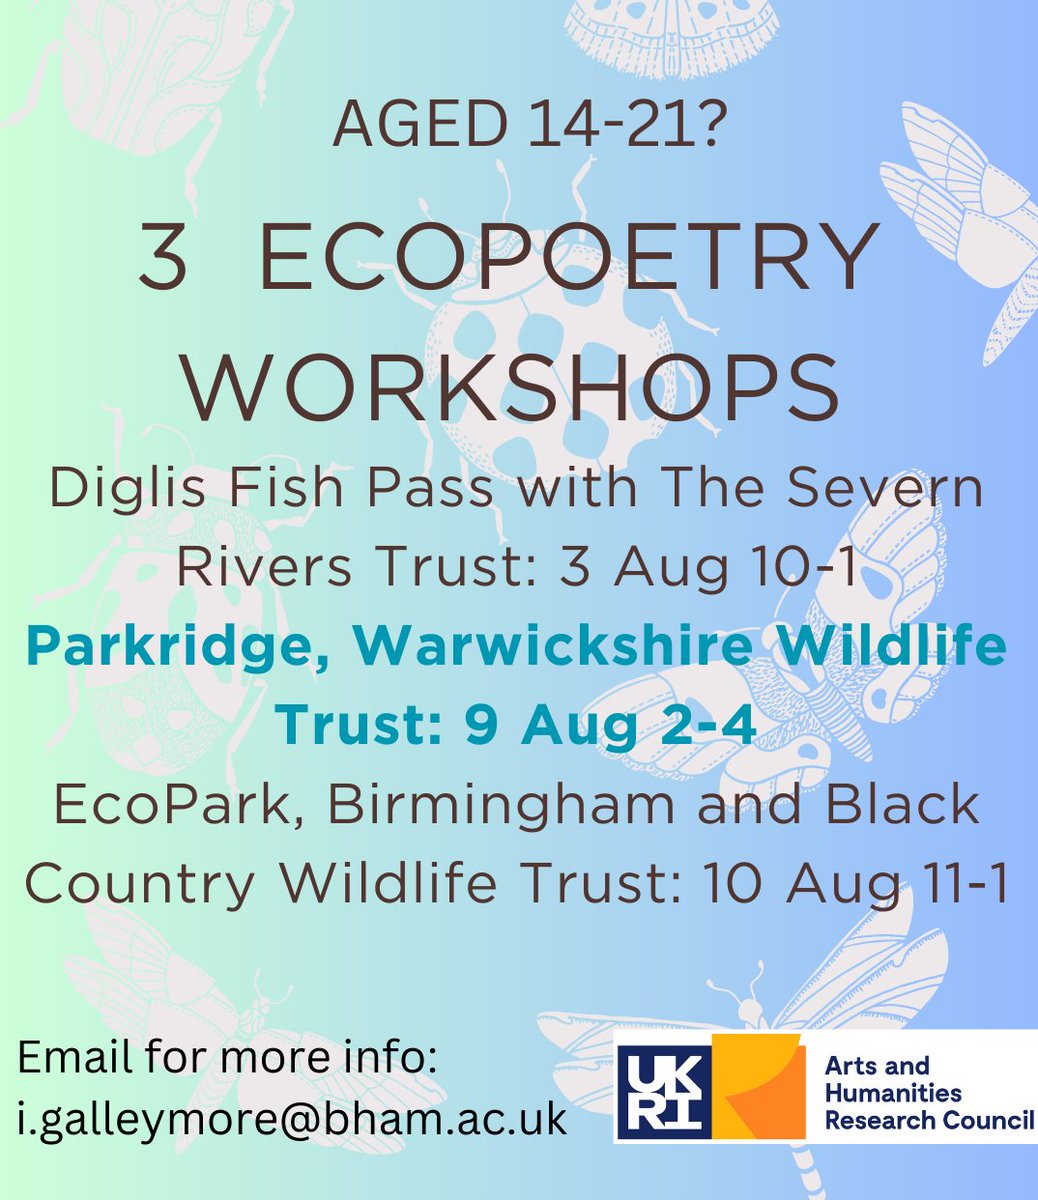 Who'd like a side of pond-dipping, insect magnifying and underwater viewing with their poetry this summer? Join me and my fabulous partners next month for some free ecopoetry workshops in which we'll think about cuteness, wonder and ickiness in the natural world. Free. Ages 14-21